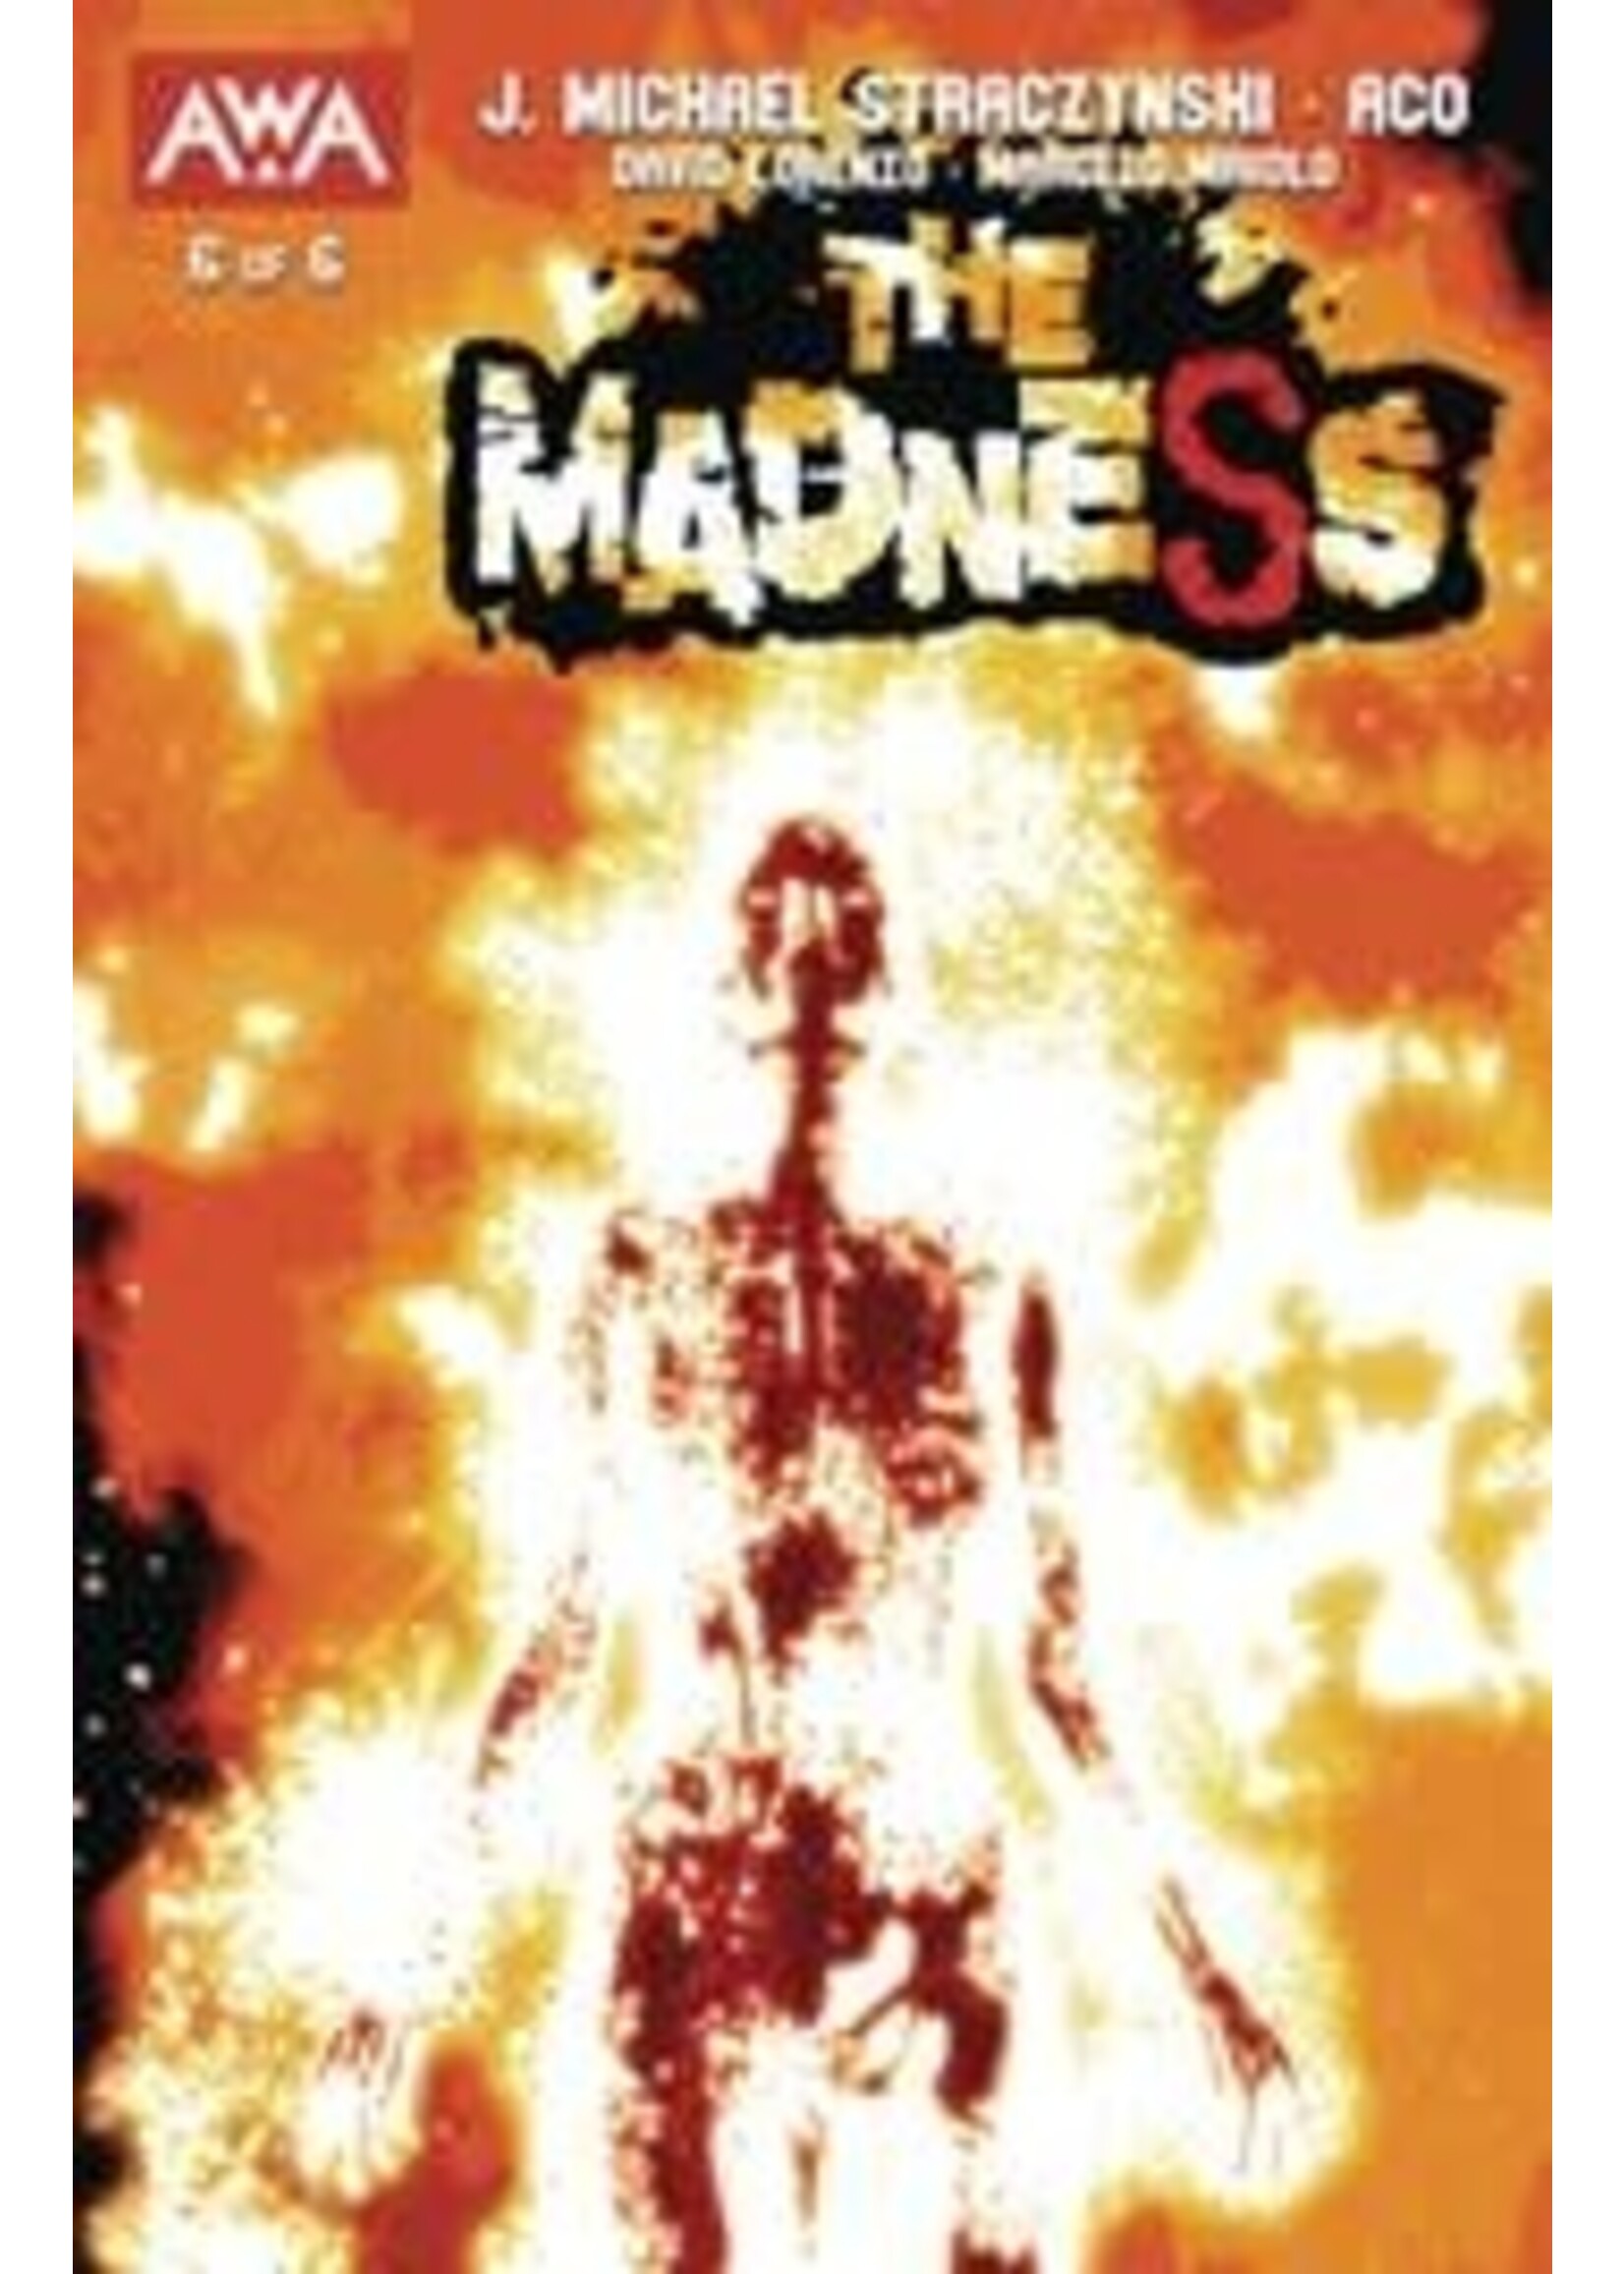 AWA STUDIOS THE MADNESS complete 6 issue series